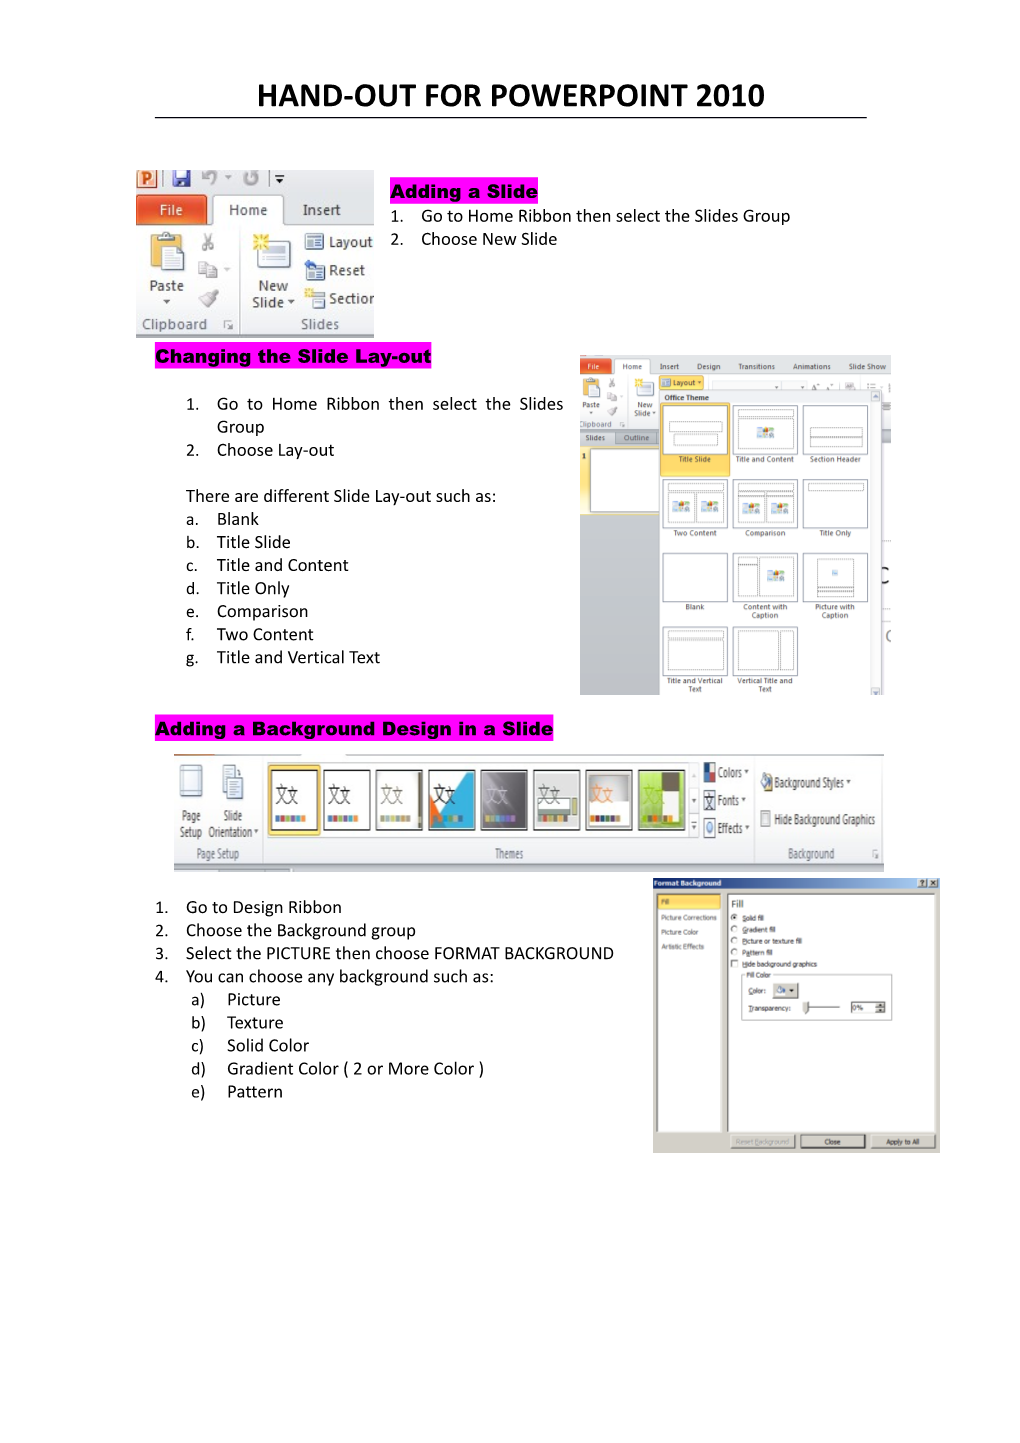 Hand-Out for Powerpoint 2010